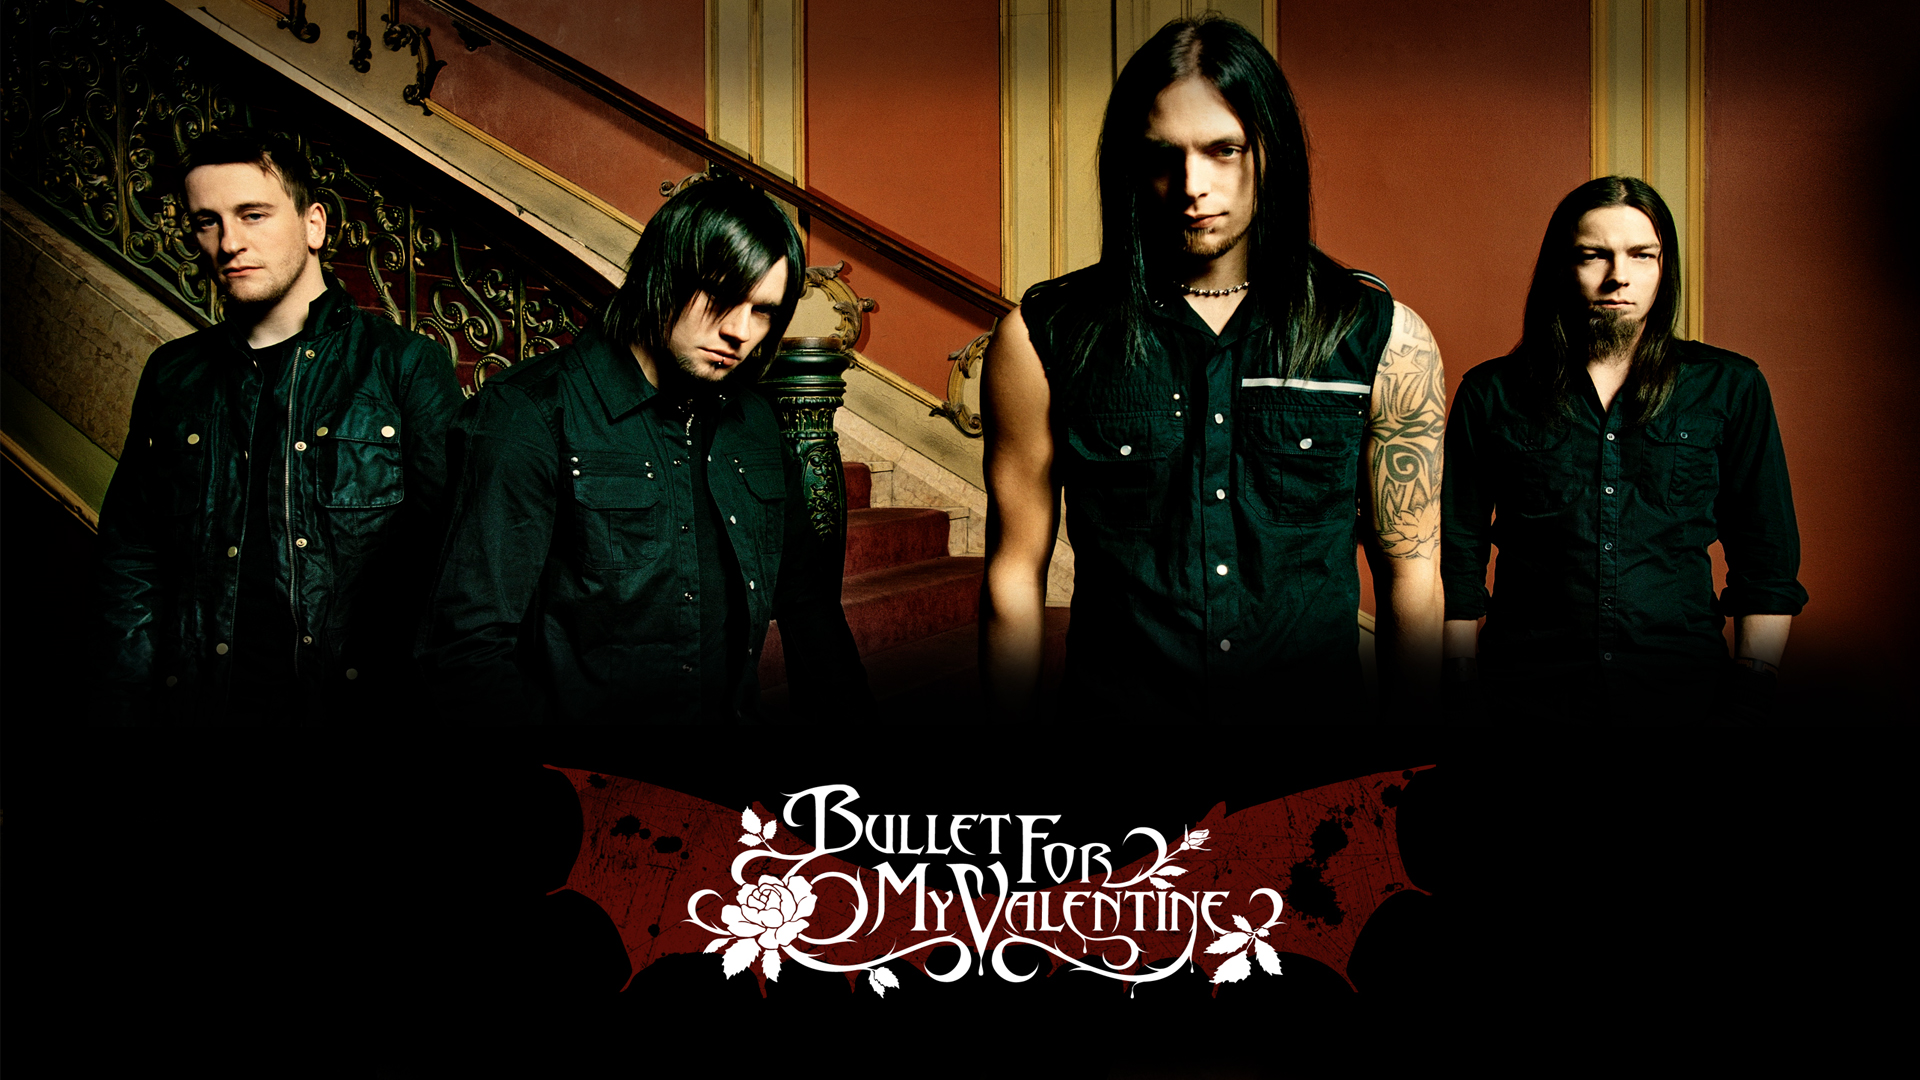 Popular Bullet For My Valentine Image for Phone